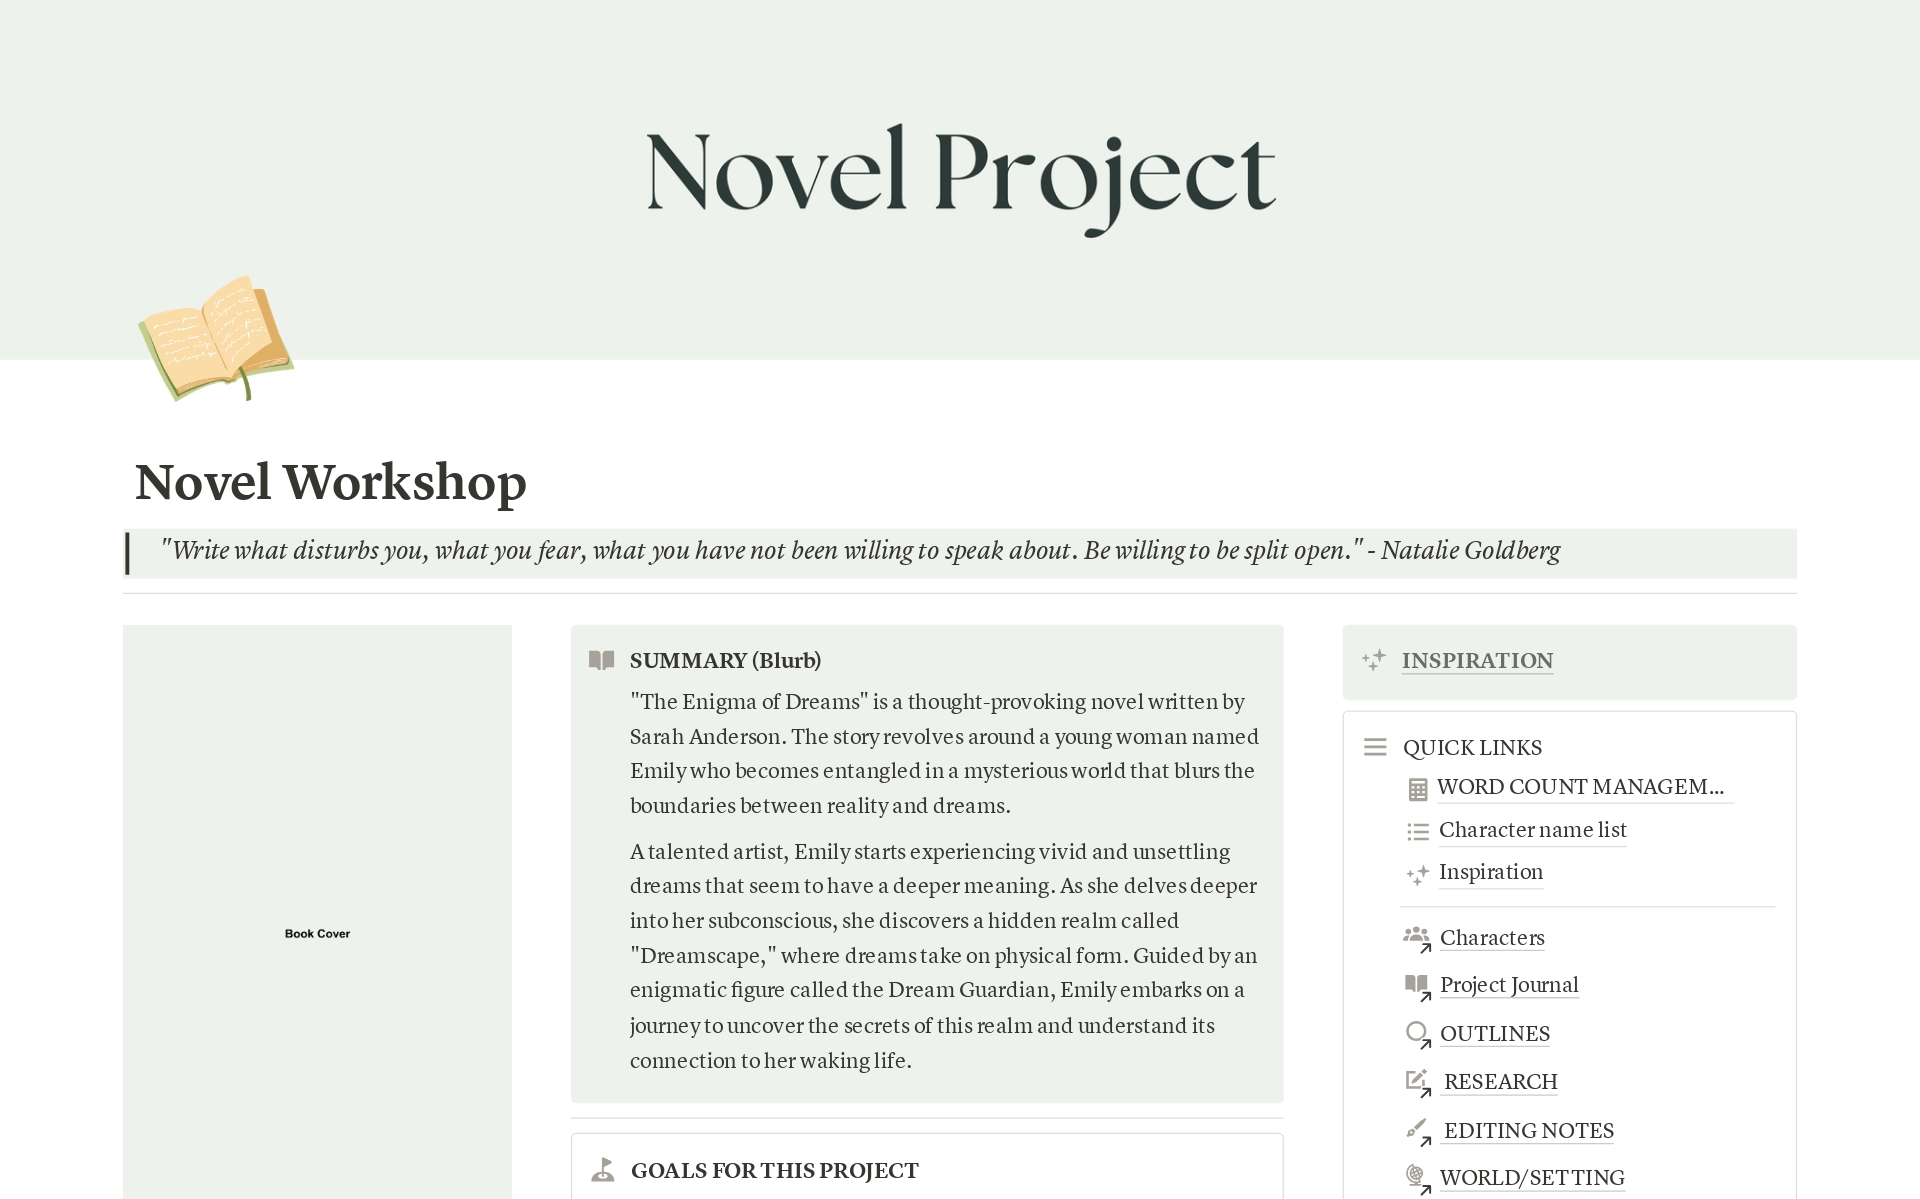 DISCOVER SOMETHING NEW! GET EXITED ABOUT YOUR PROJECTS! HERE IS AN ALL-IN-ONE NOVEL PROJECT TEMPLATE TO HELP YOU ORGANIZE YOUR BRILLIANT IDEA!